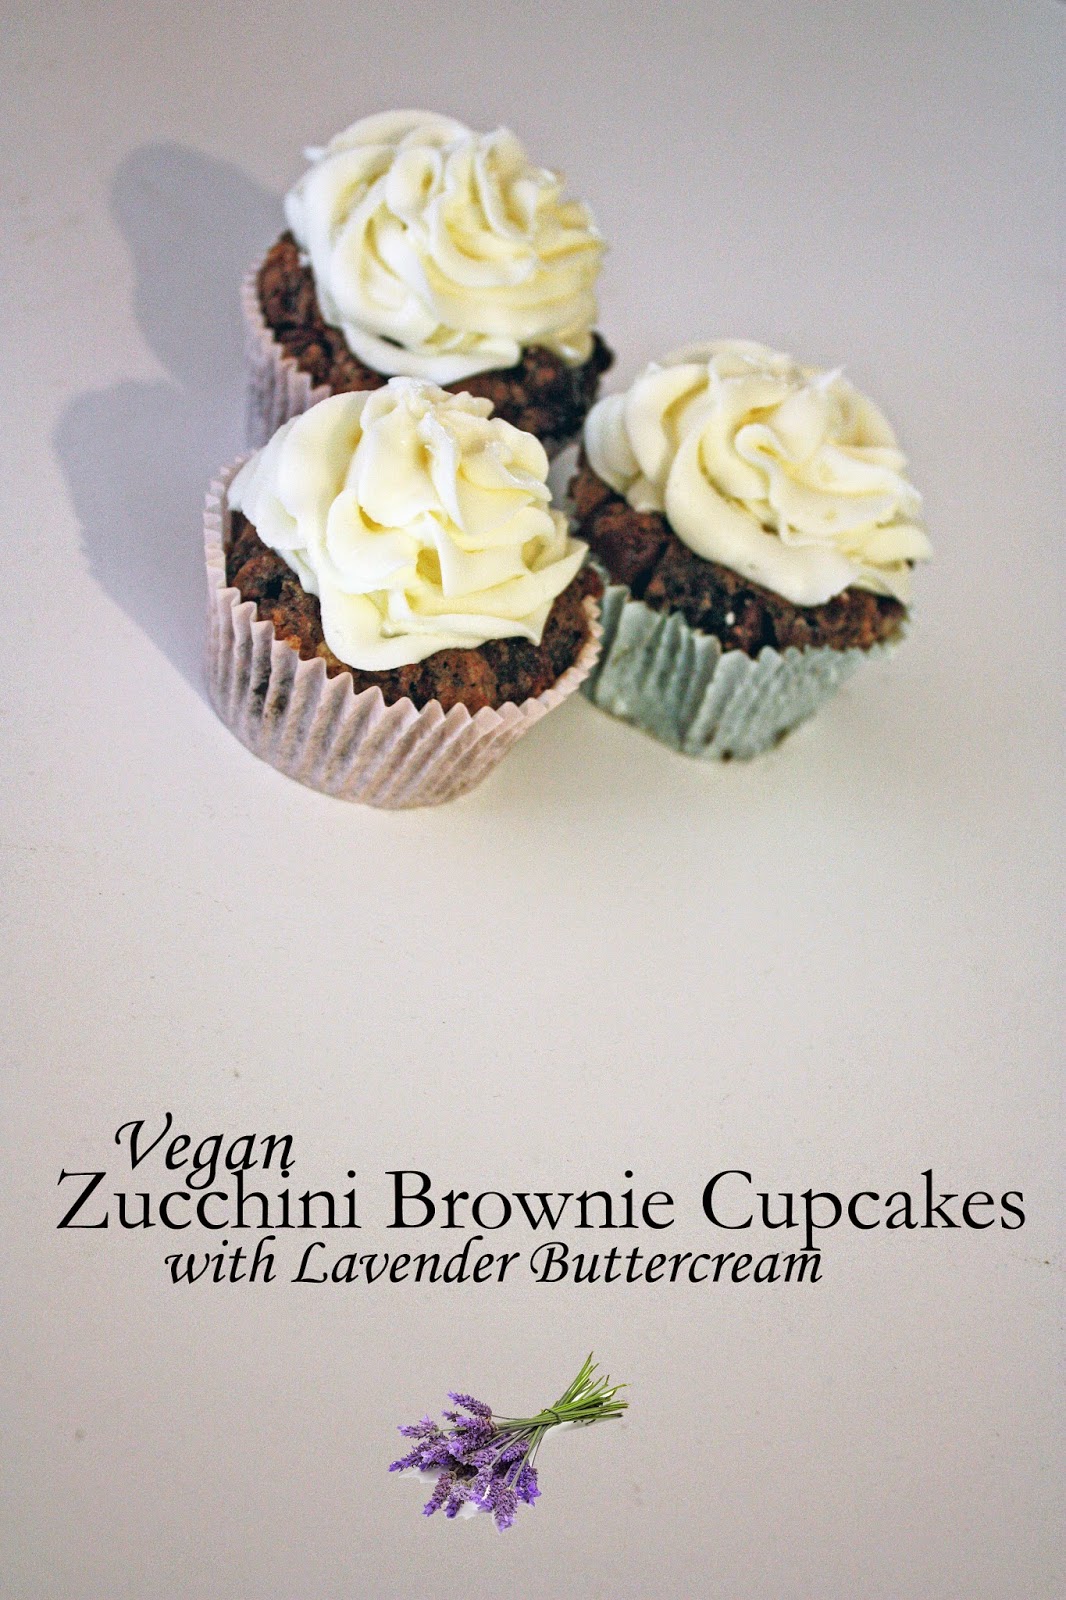 zucchini cupcakes with lavender buttercream